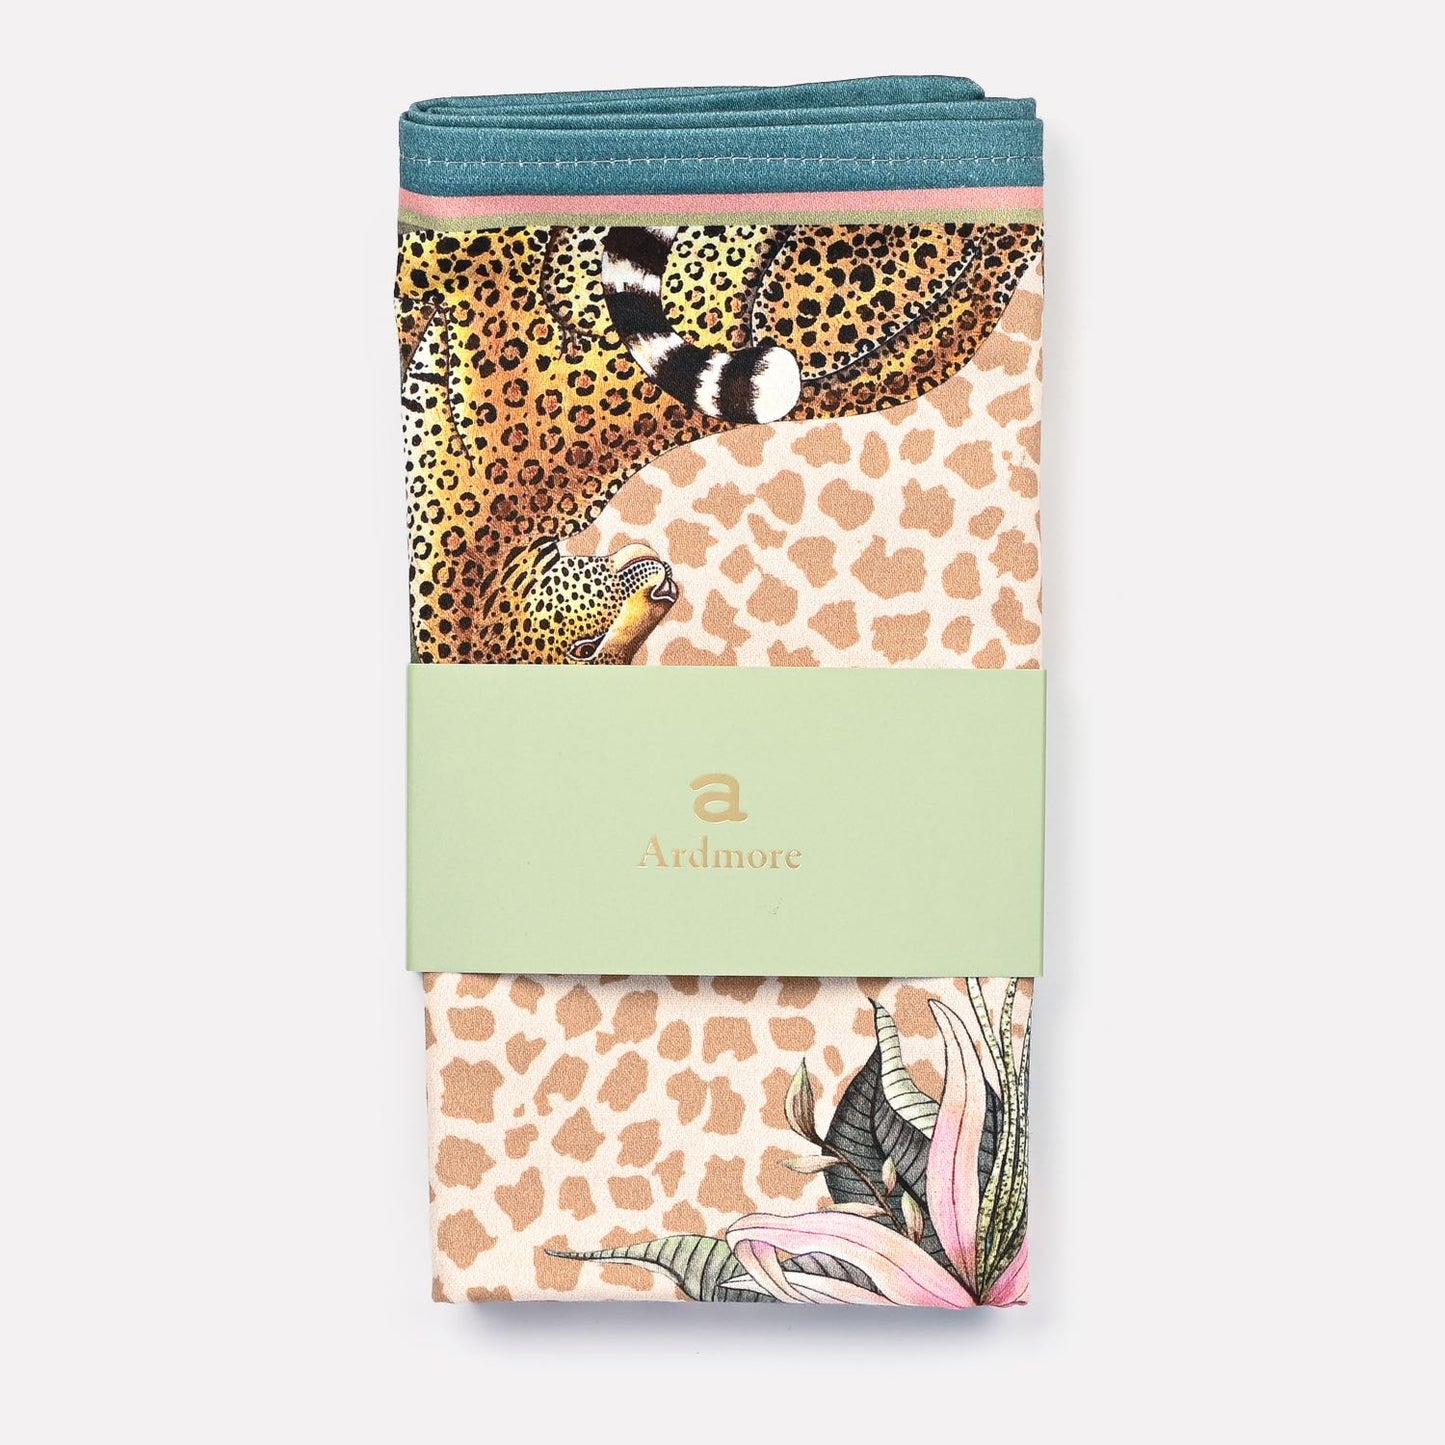 Leopard Lily Napkins in Stone (PAIR)